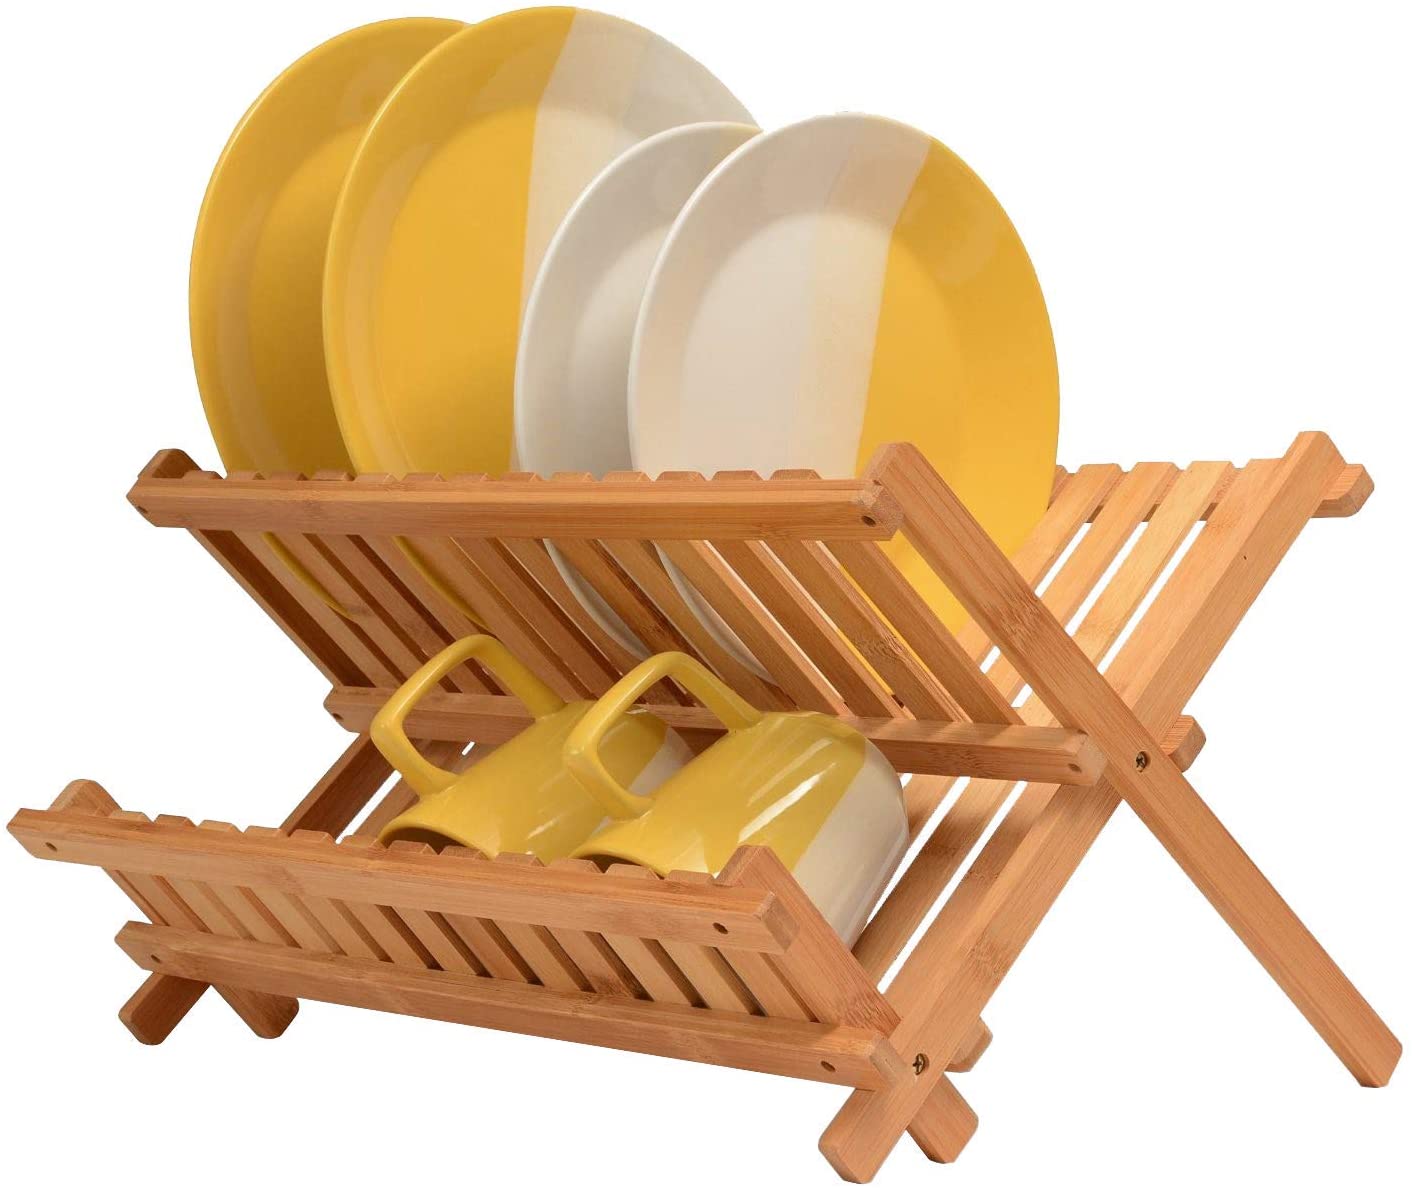 Tacoday Bamboo Dish Drying Rack,Collapsible Dish Drainer Rack,3 Tier, Size: 16.1*14.2*9.1, Other